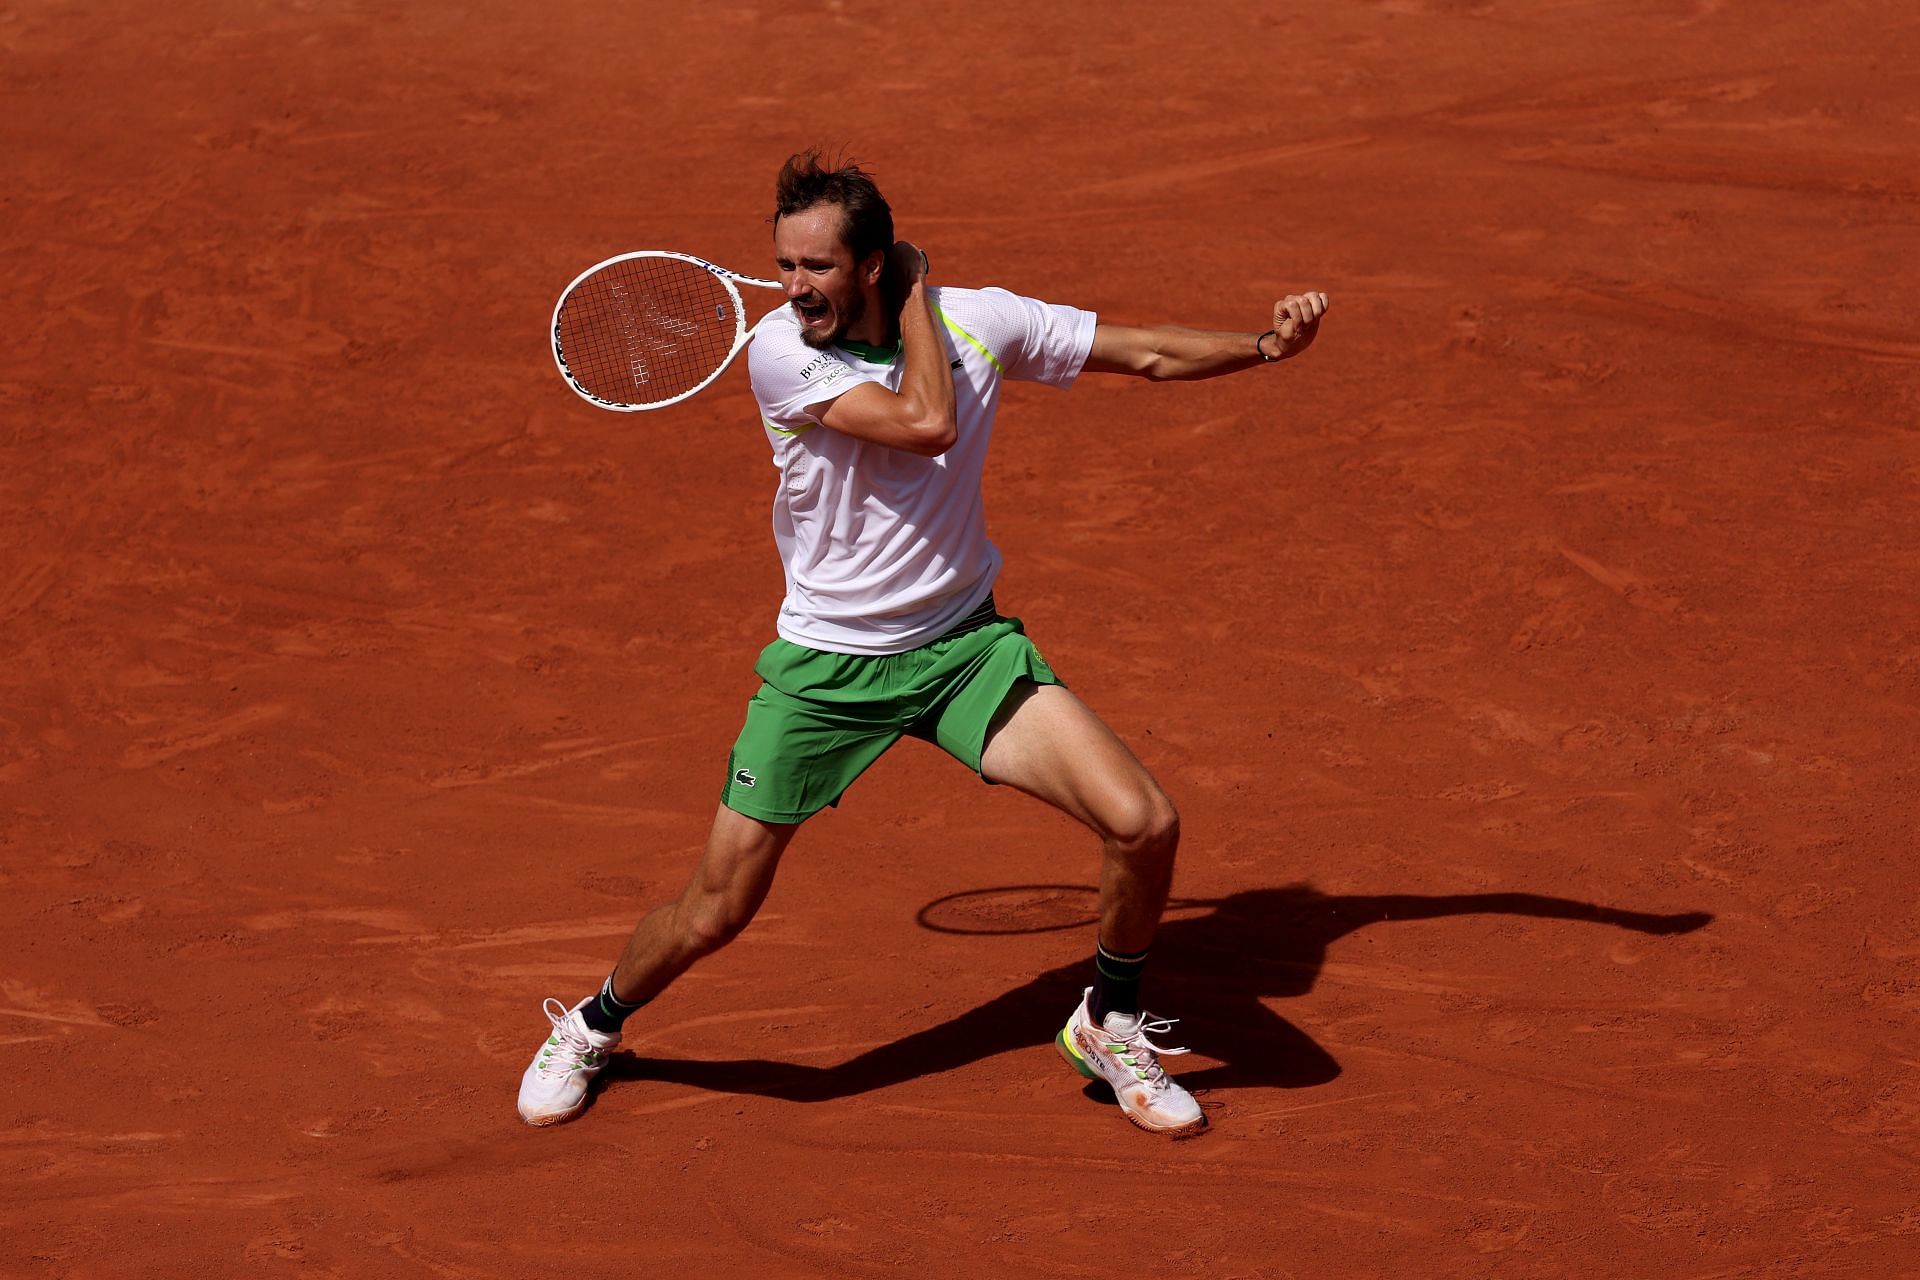 Daniil Medvedev in action at the French Open